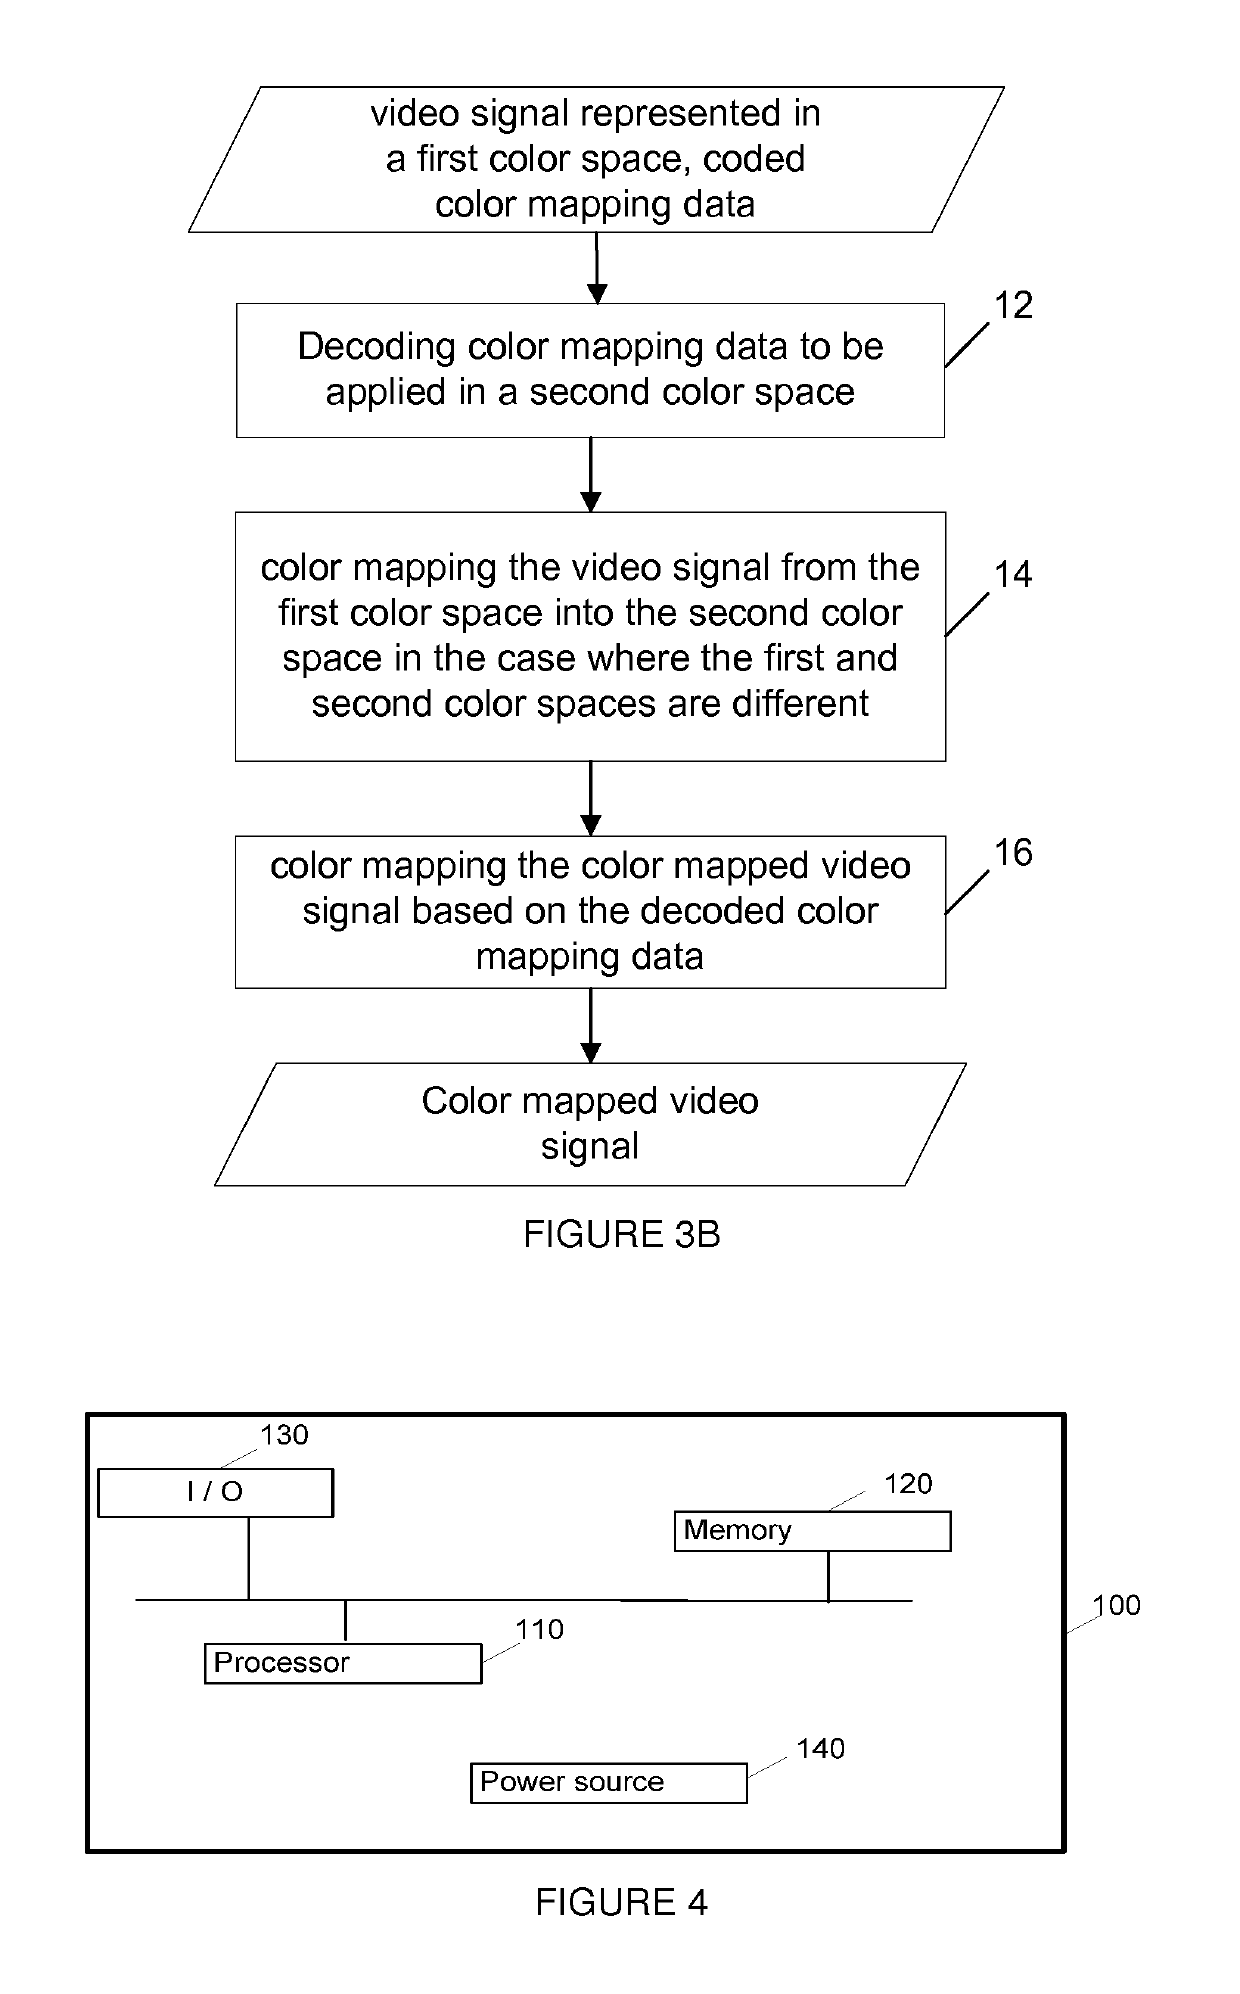 Method for color mapping a video signal based on color mapping data and method of encoding a video signal and color mapping data and corresponding devices